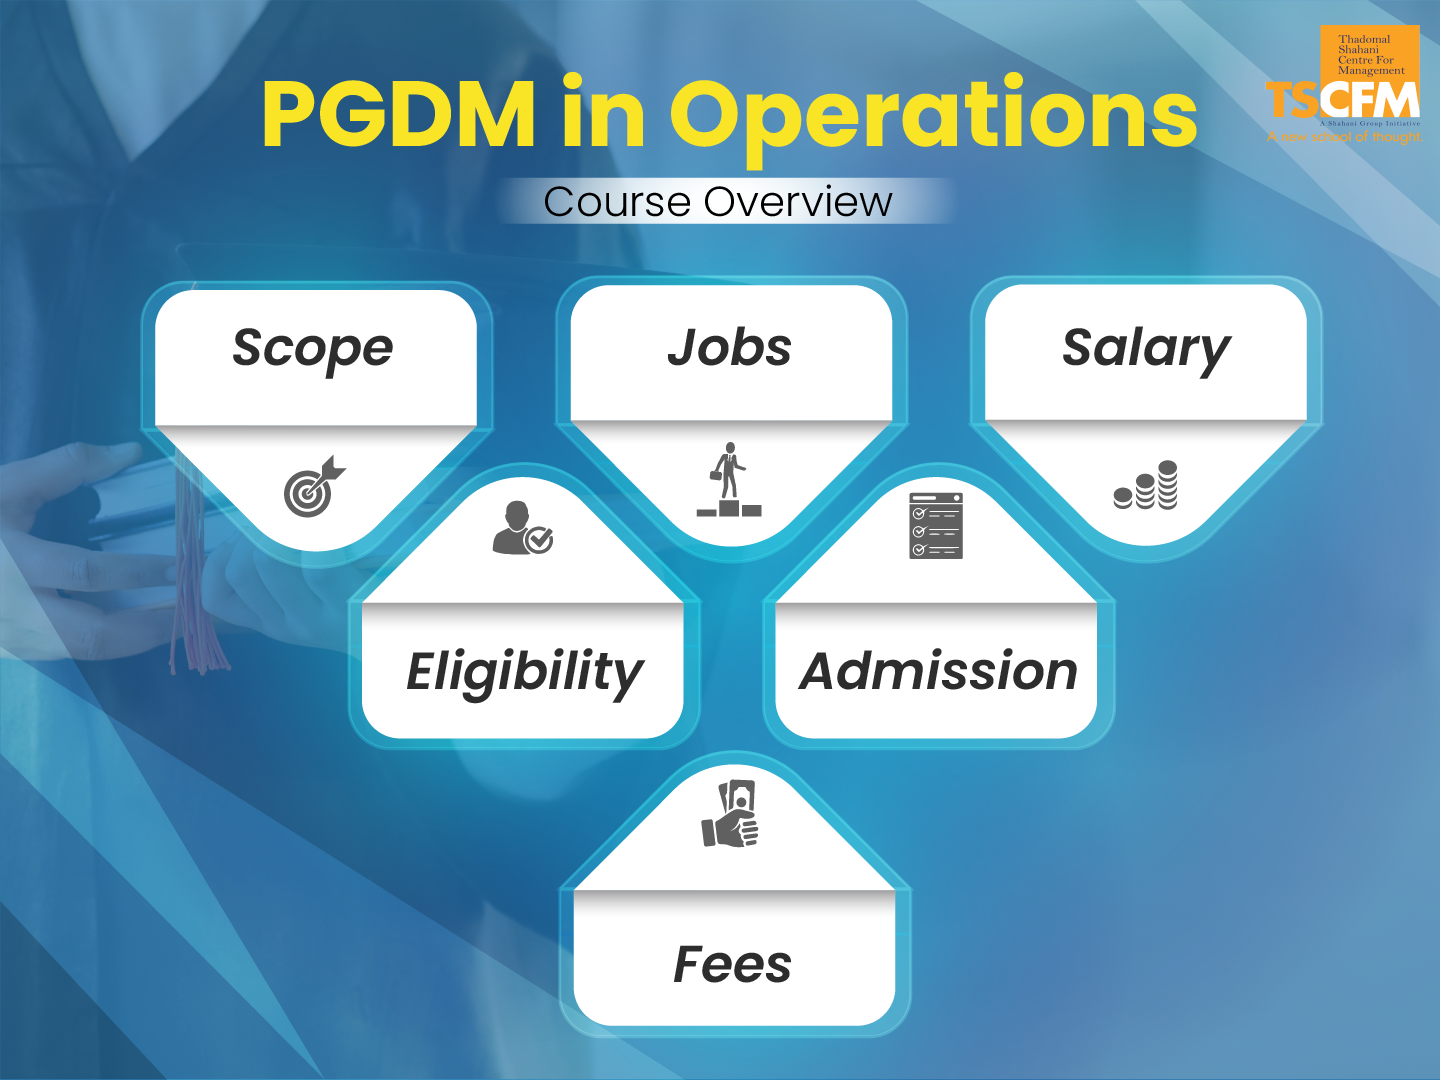 PGDM in Operations: Scope, Jobs, Salary, Eligibility, Admission, Fees